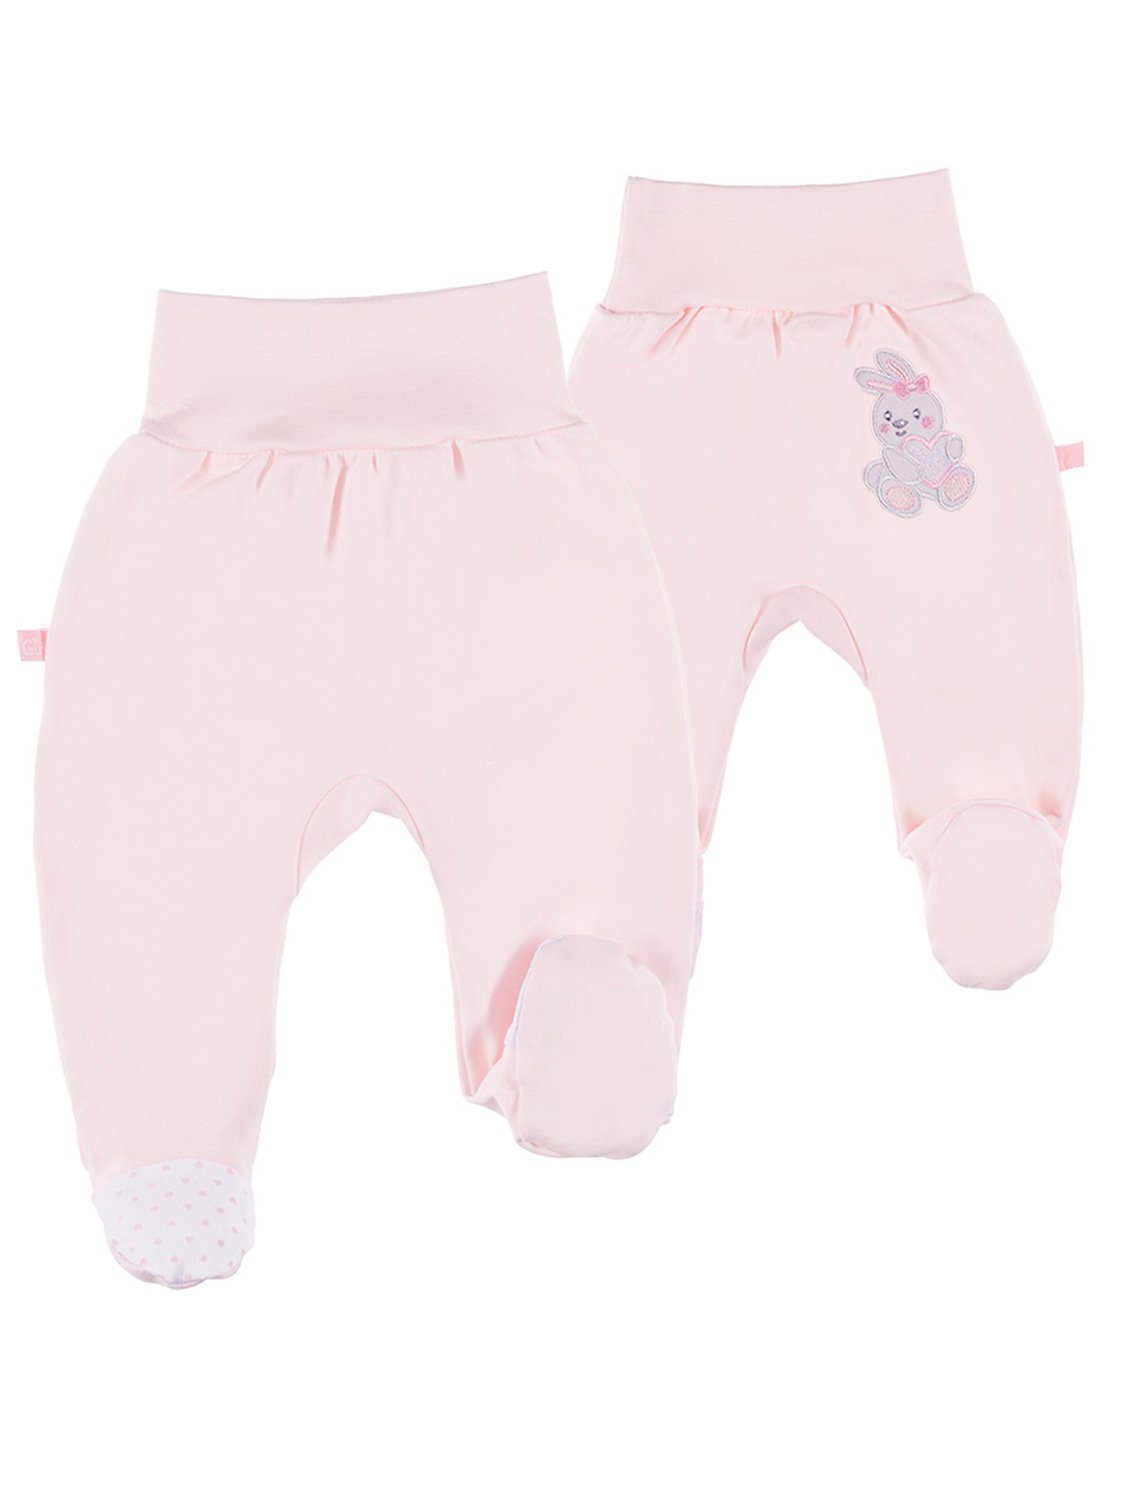 Early Baby Footed Trousers, Embroidered Bunny Rabbit on the Rear - Pink - Trousers / Leggings - EEVI